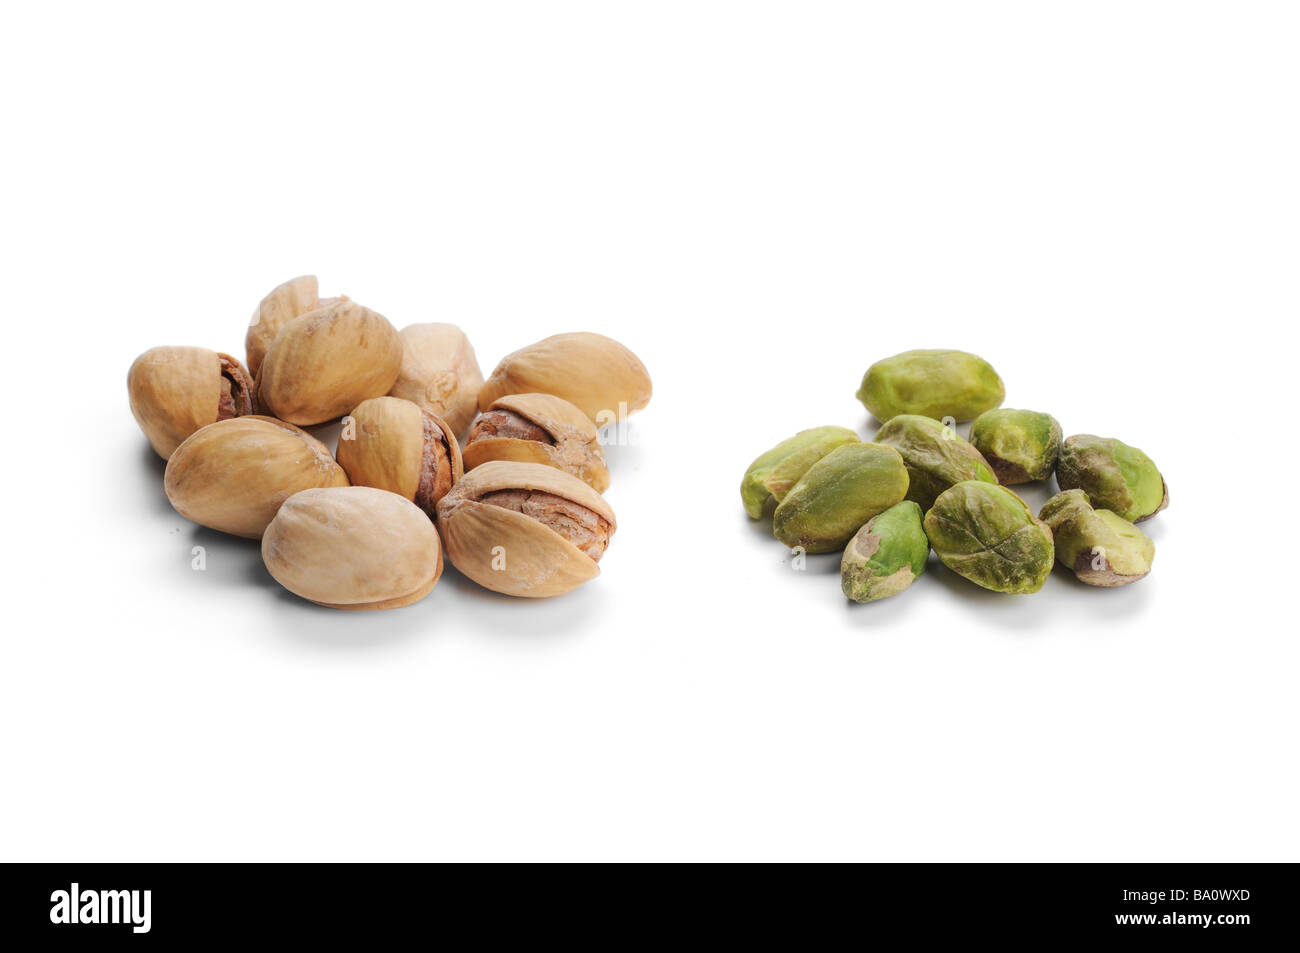 Pistachio Nuts shelled and unshelled Stock Photo